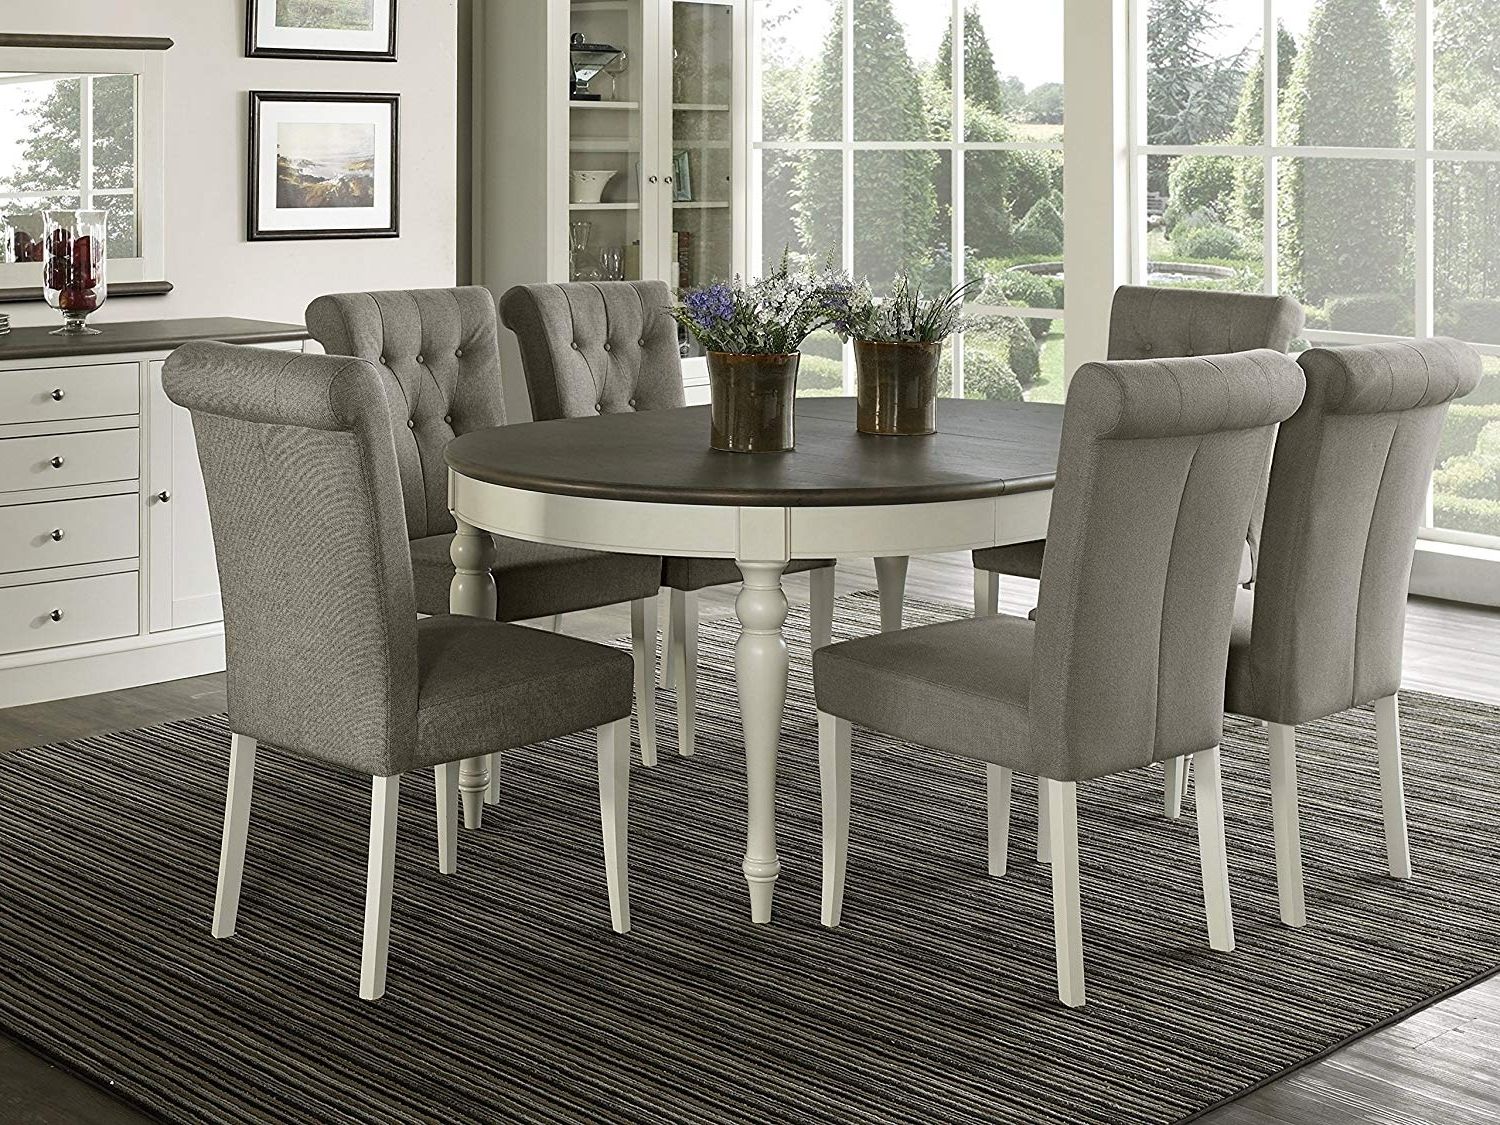 Most Recent Amazon – Vegas 7 Piece Round To Oval Extension Dining Table Set With Market 7 Piece Dining Sets With Host And Side Chairs (View 6 of 25)